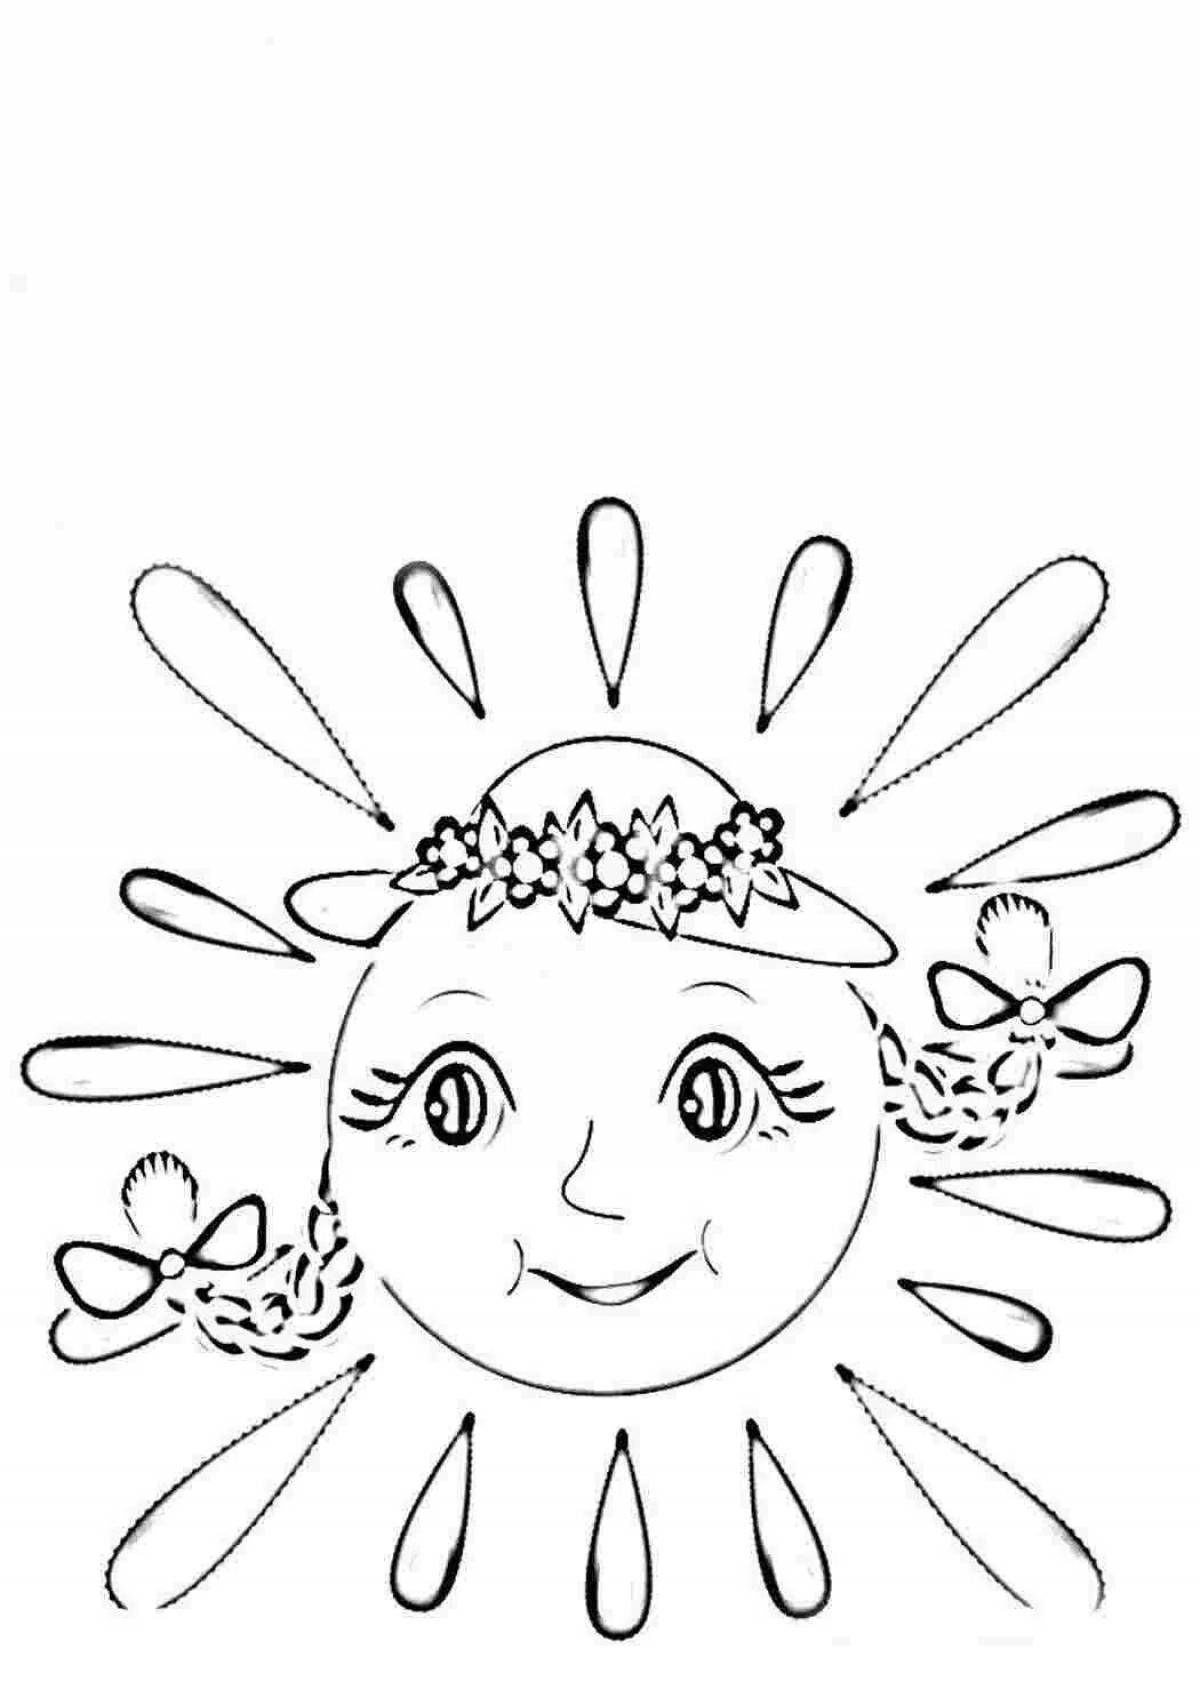 Colorful sun coloring book for kids